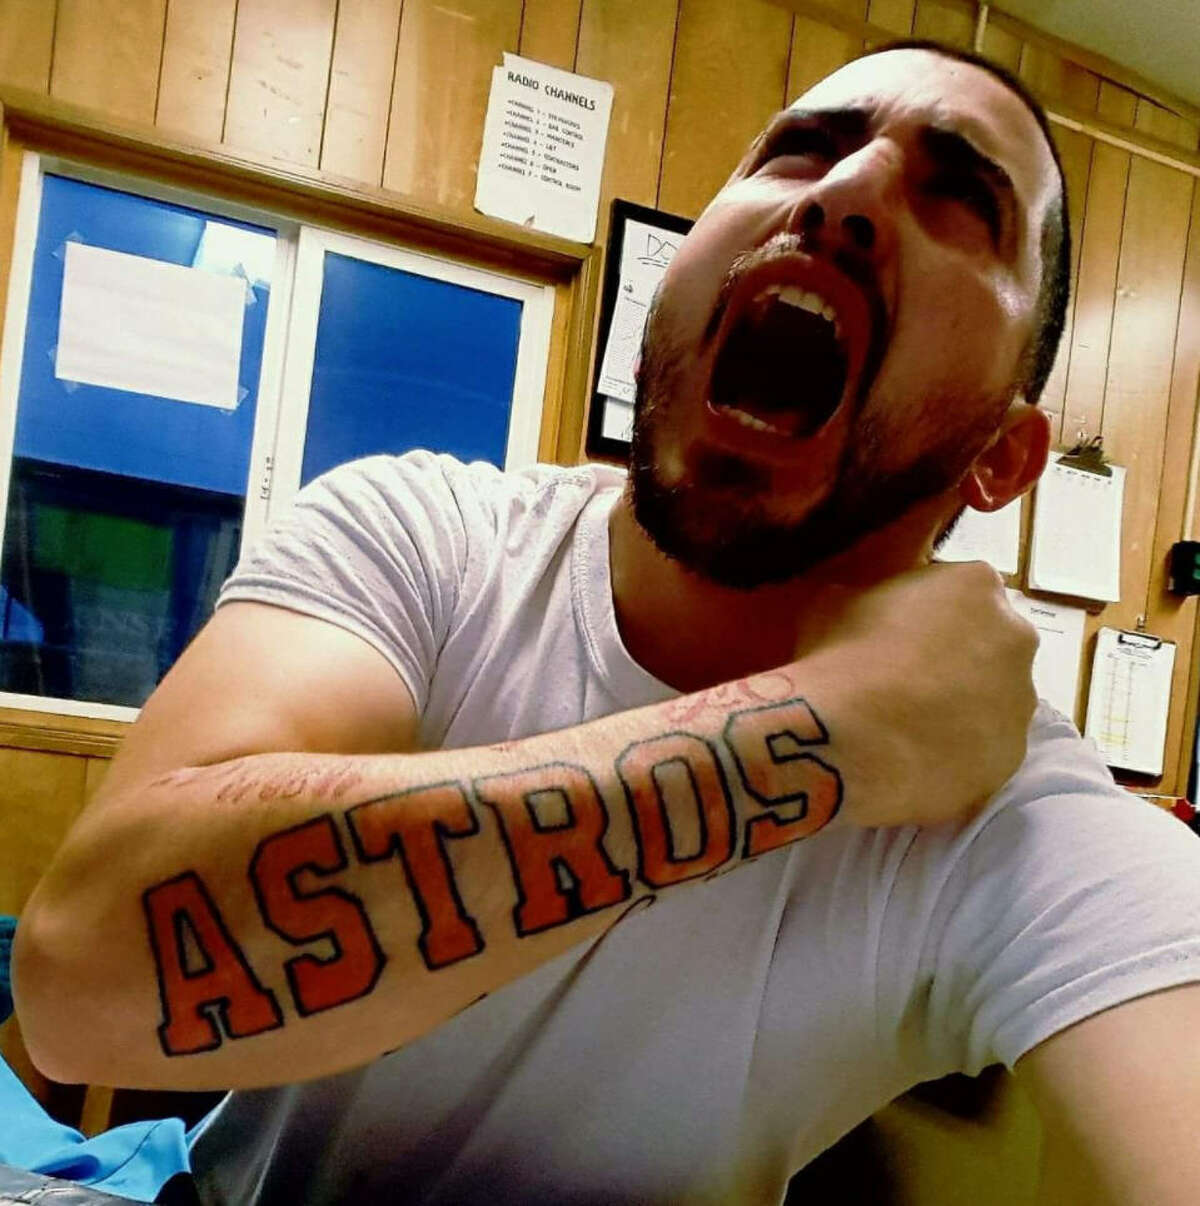 Following the Astros' first-ever World Series Championship win, fans commemorated the win with honorary tattoos.